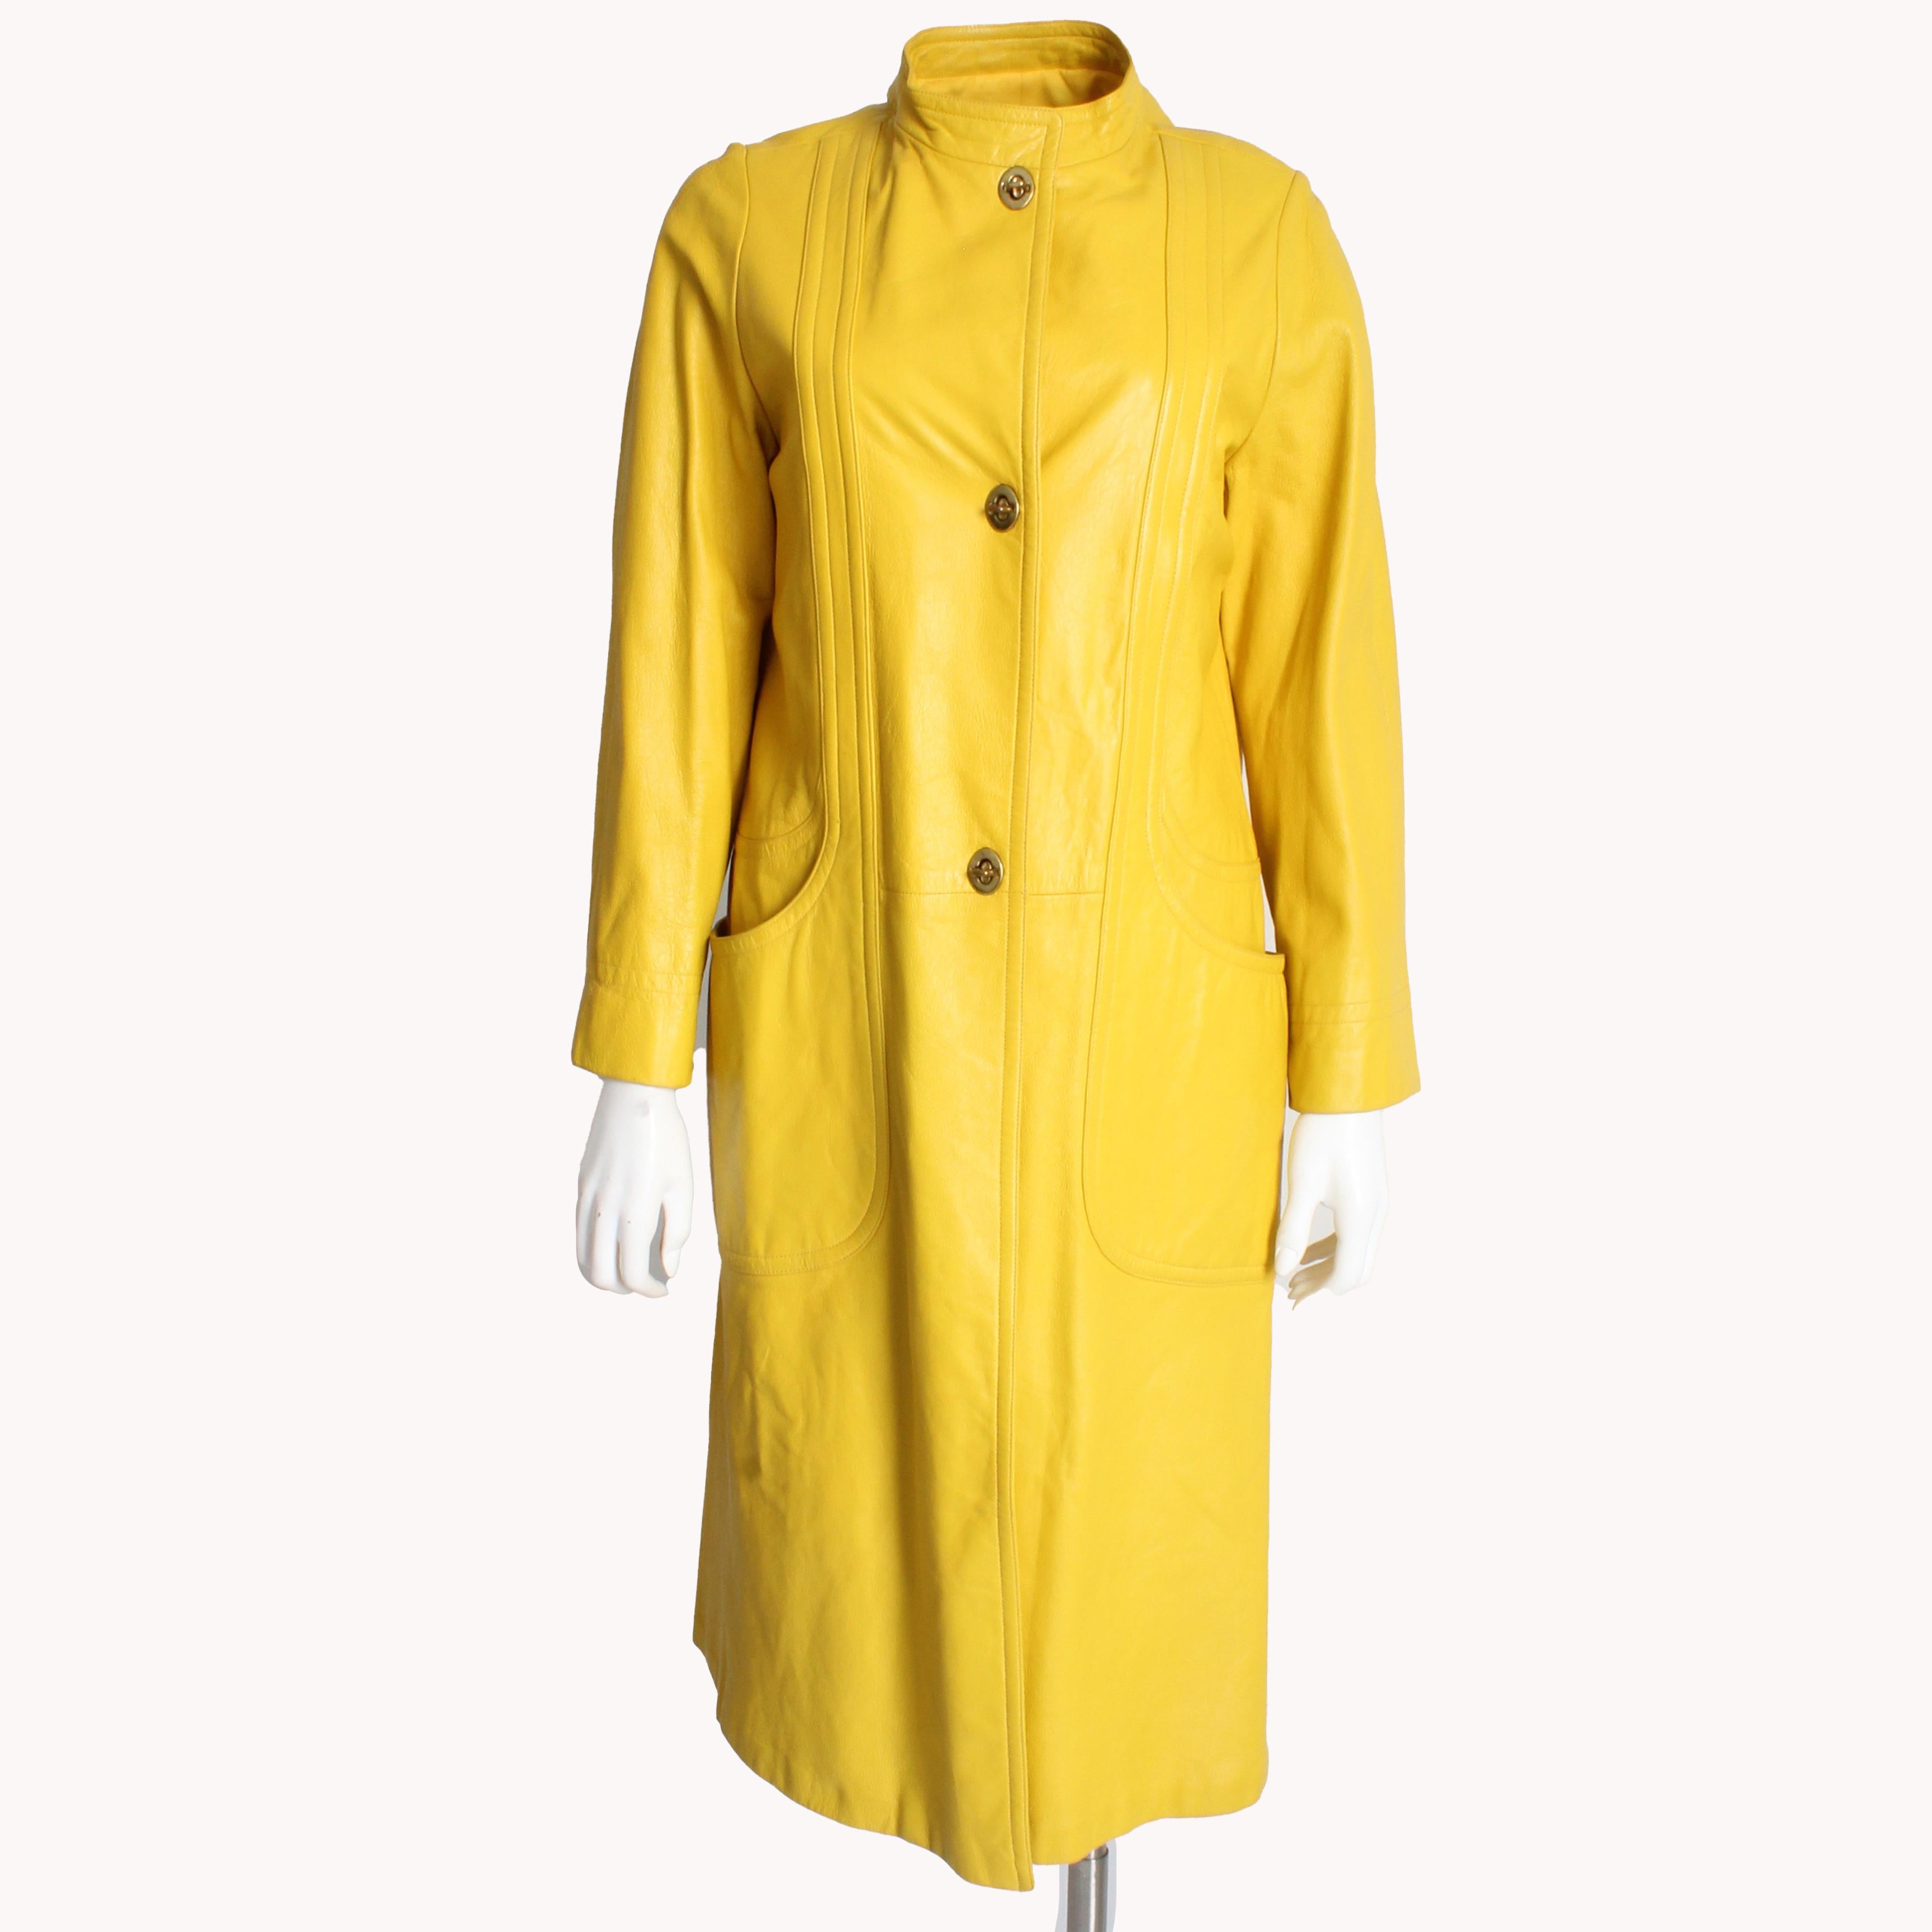 Bonnie Cashin for Sills Coat Long Leather Jacket Bright Yellow Mod Vintage 60s  In Good Condition For Sale In Port Saint Lucie, FL